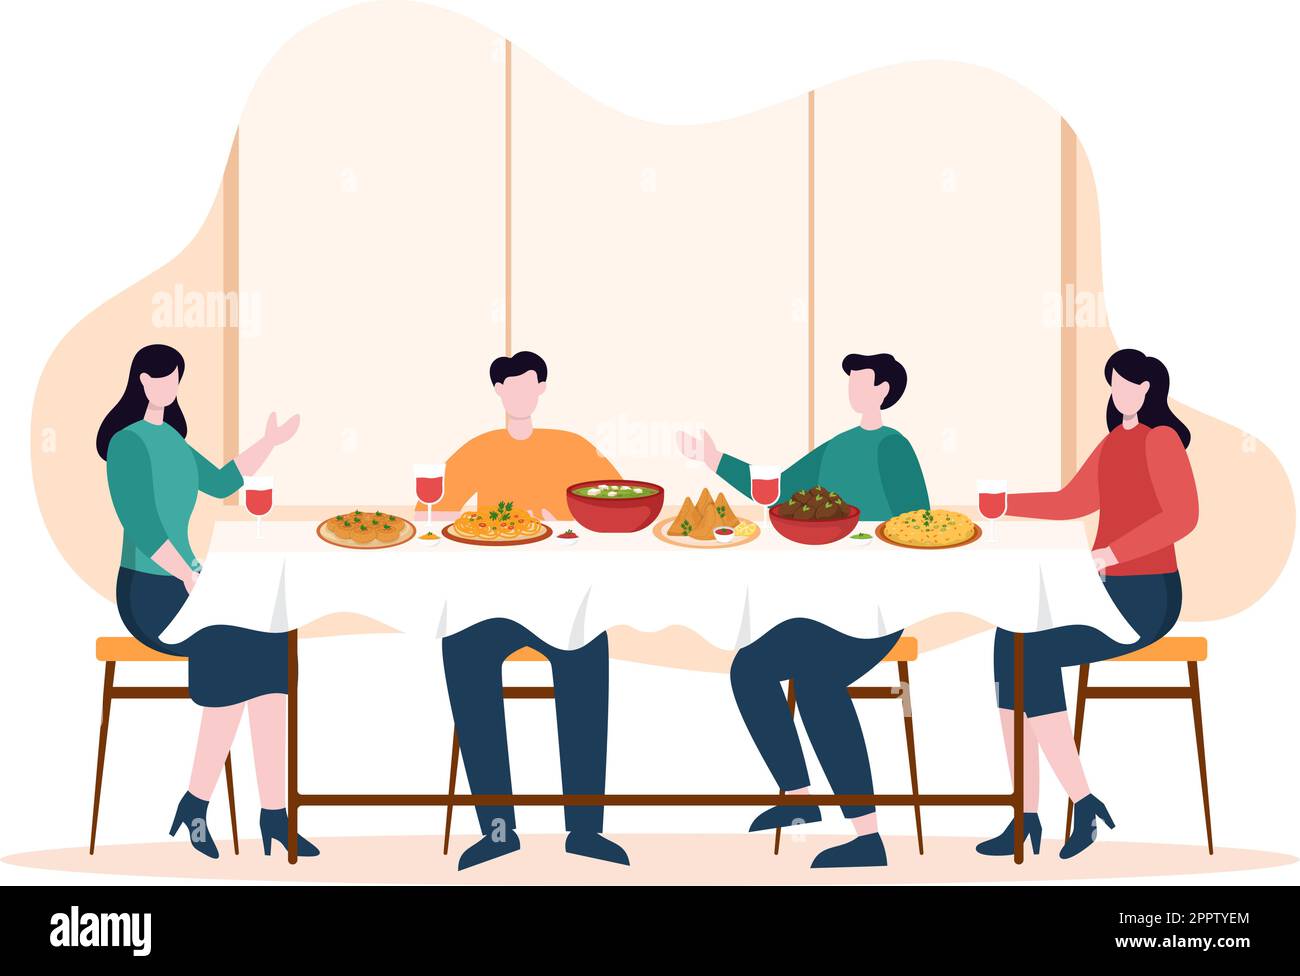 Indian Food Cartoon Illustration with Various Collections of Delicious Traditional Cuisine and Some People Eating it in a Restaurant Stock Vector